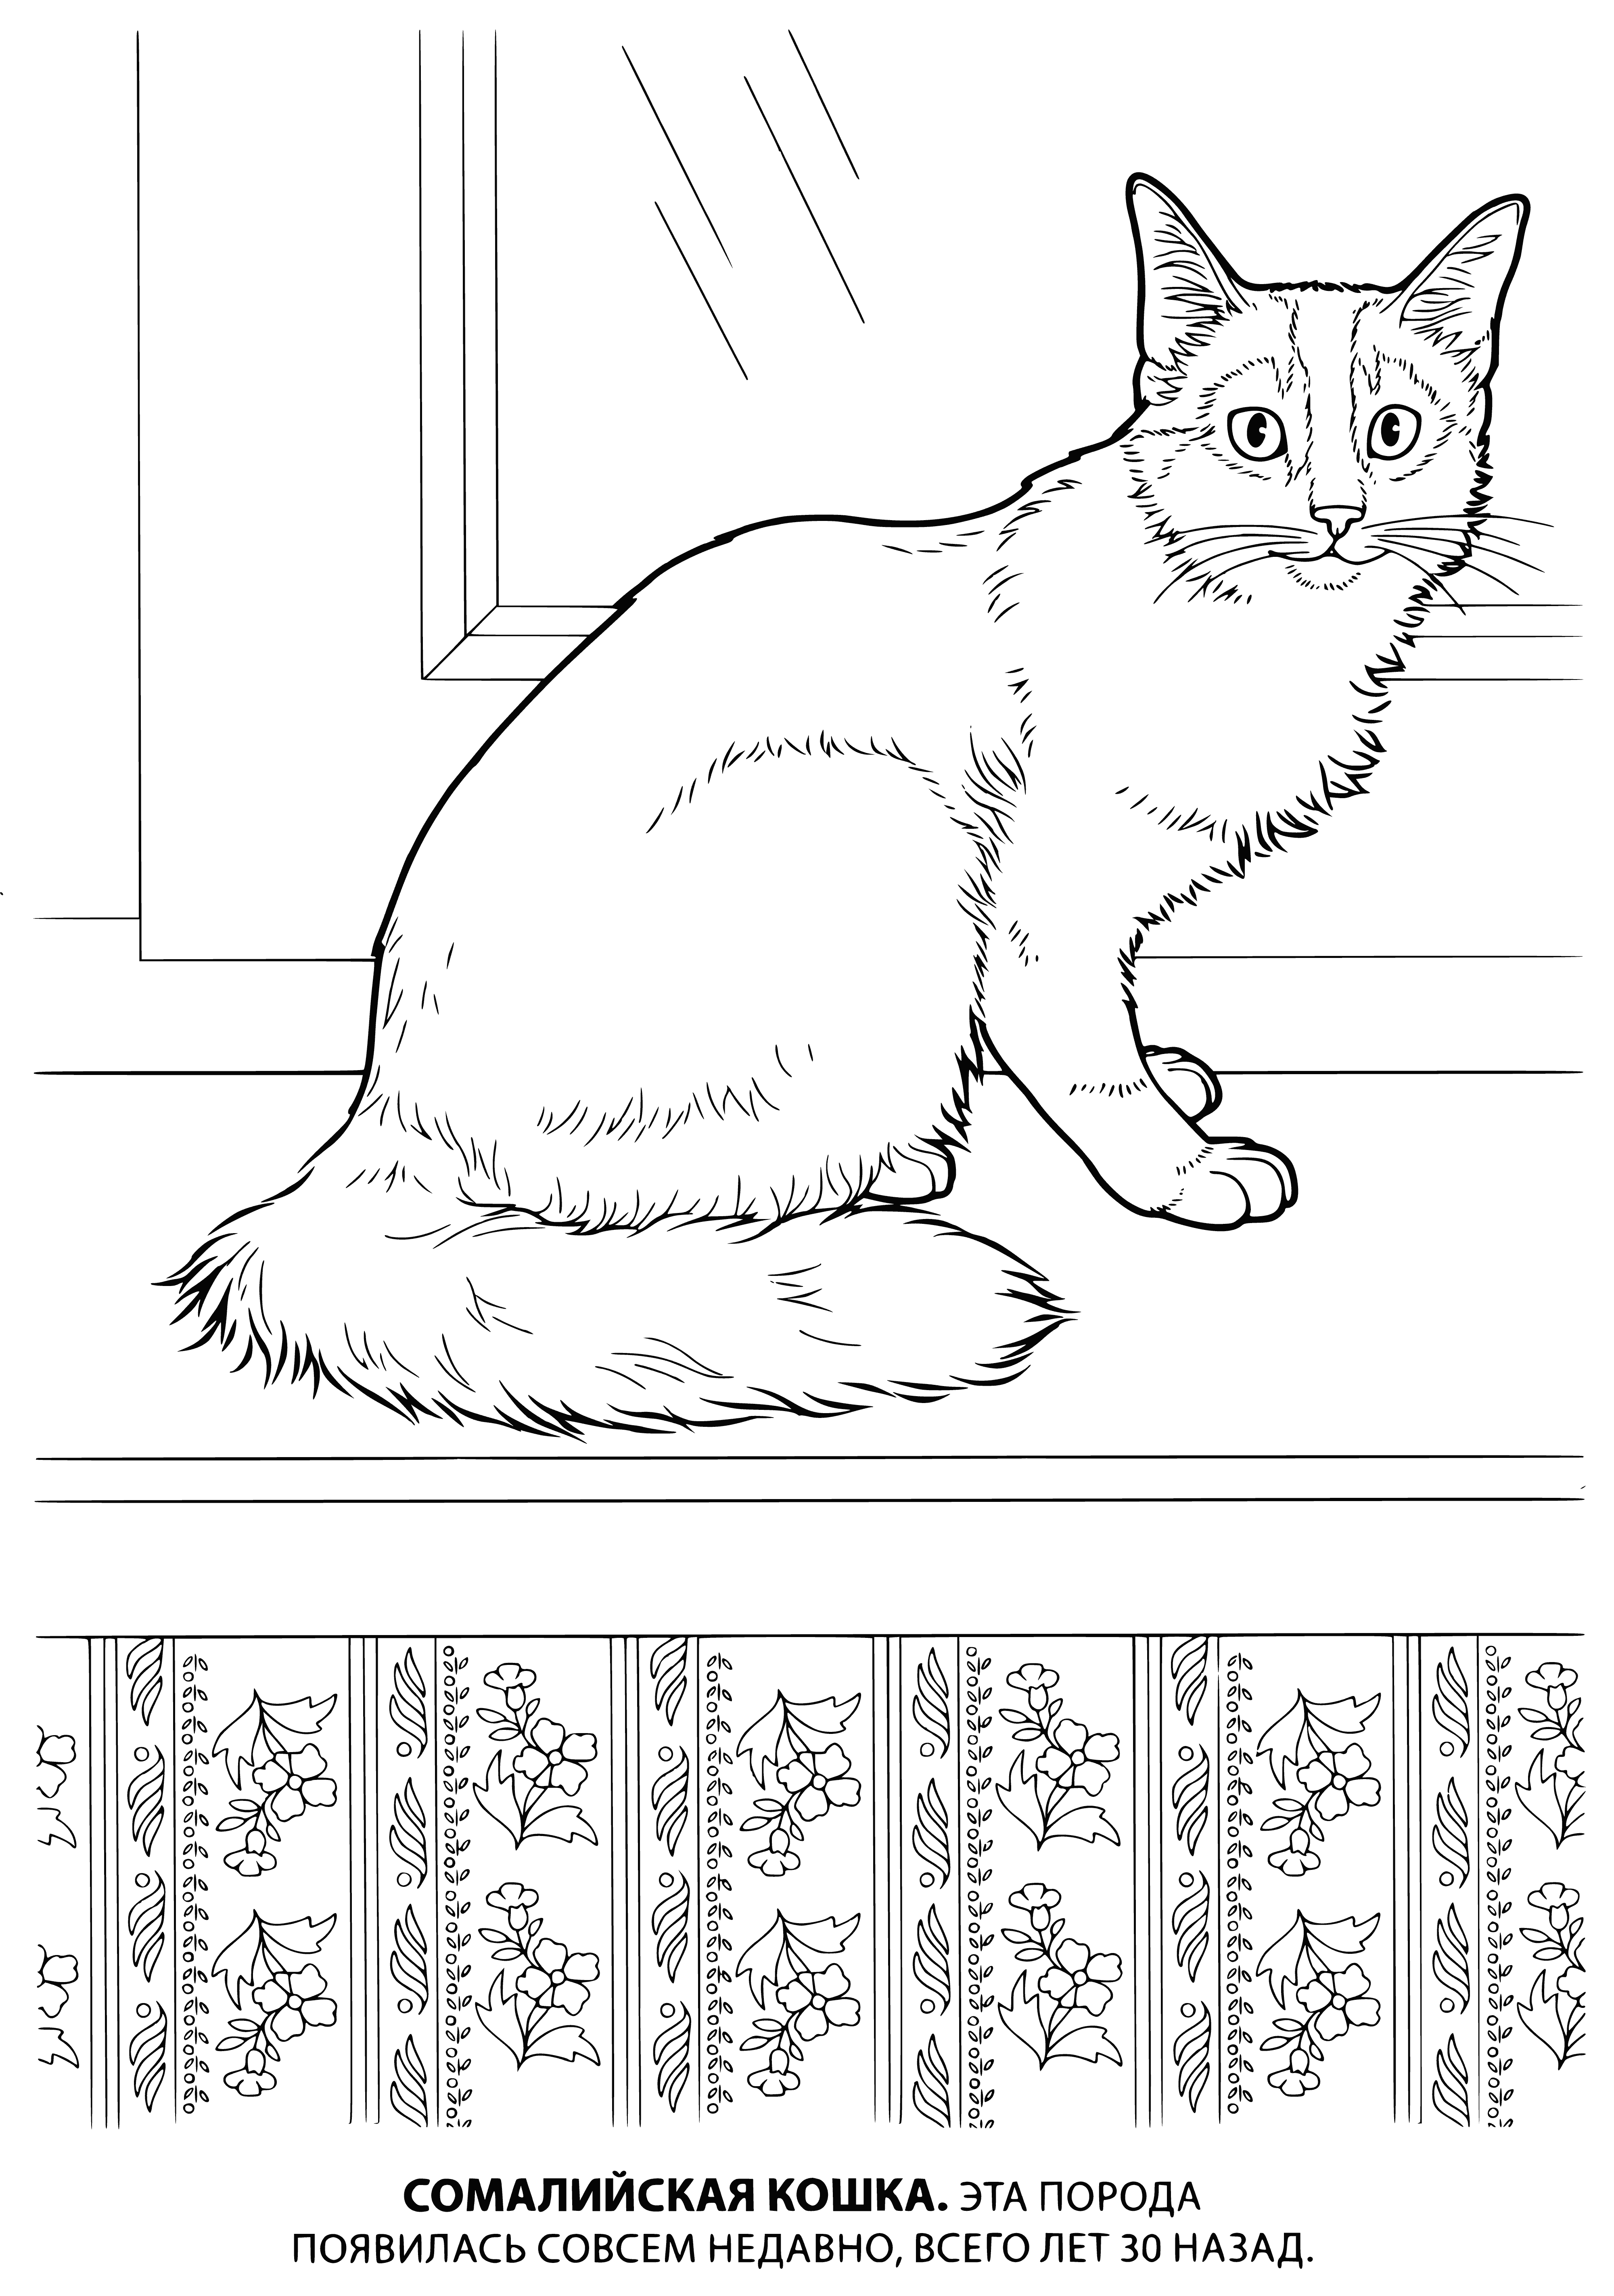 coloring page: The Somali cat is a long, thin cat with big ears and lightbrown fur. It has dark stripes along its back and tail.